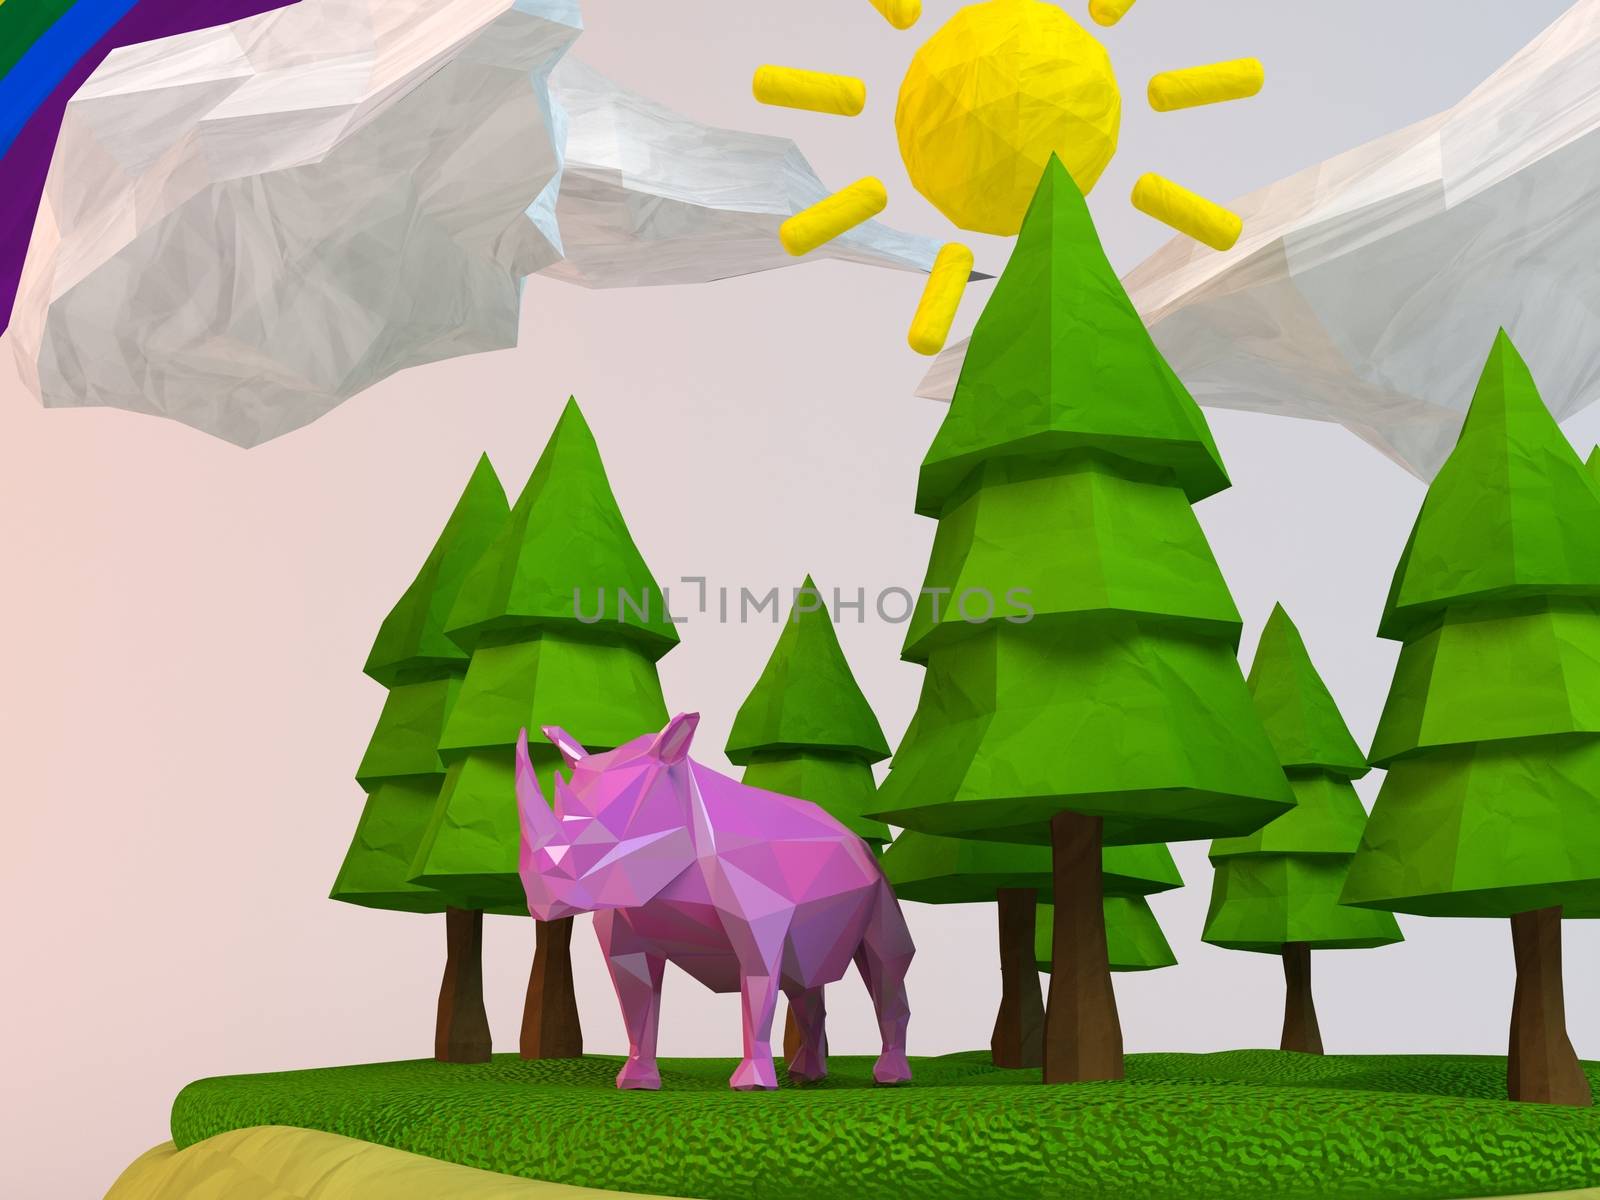 3d rhinoceros inside a low-poly green scene with sun, trees, clouds and a rainbow